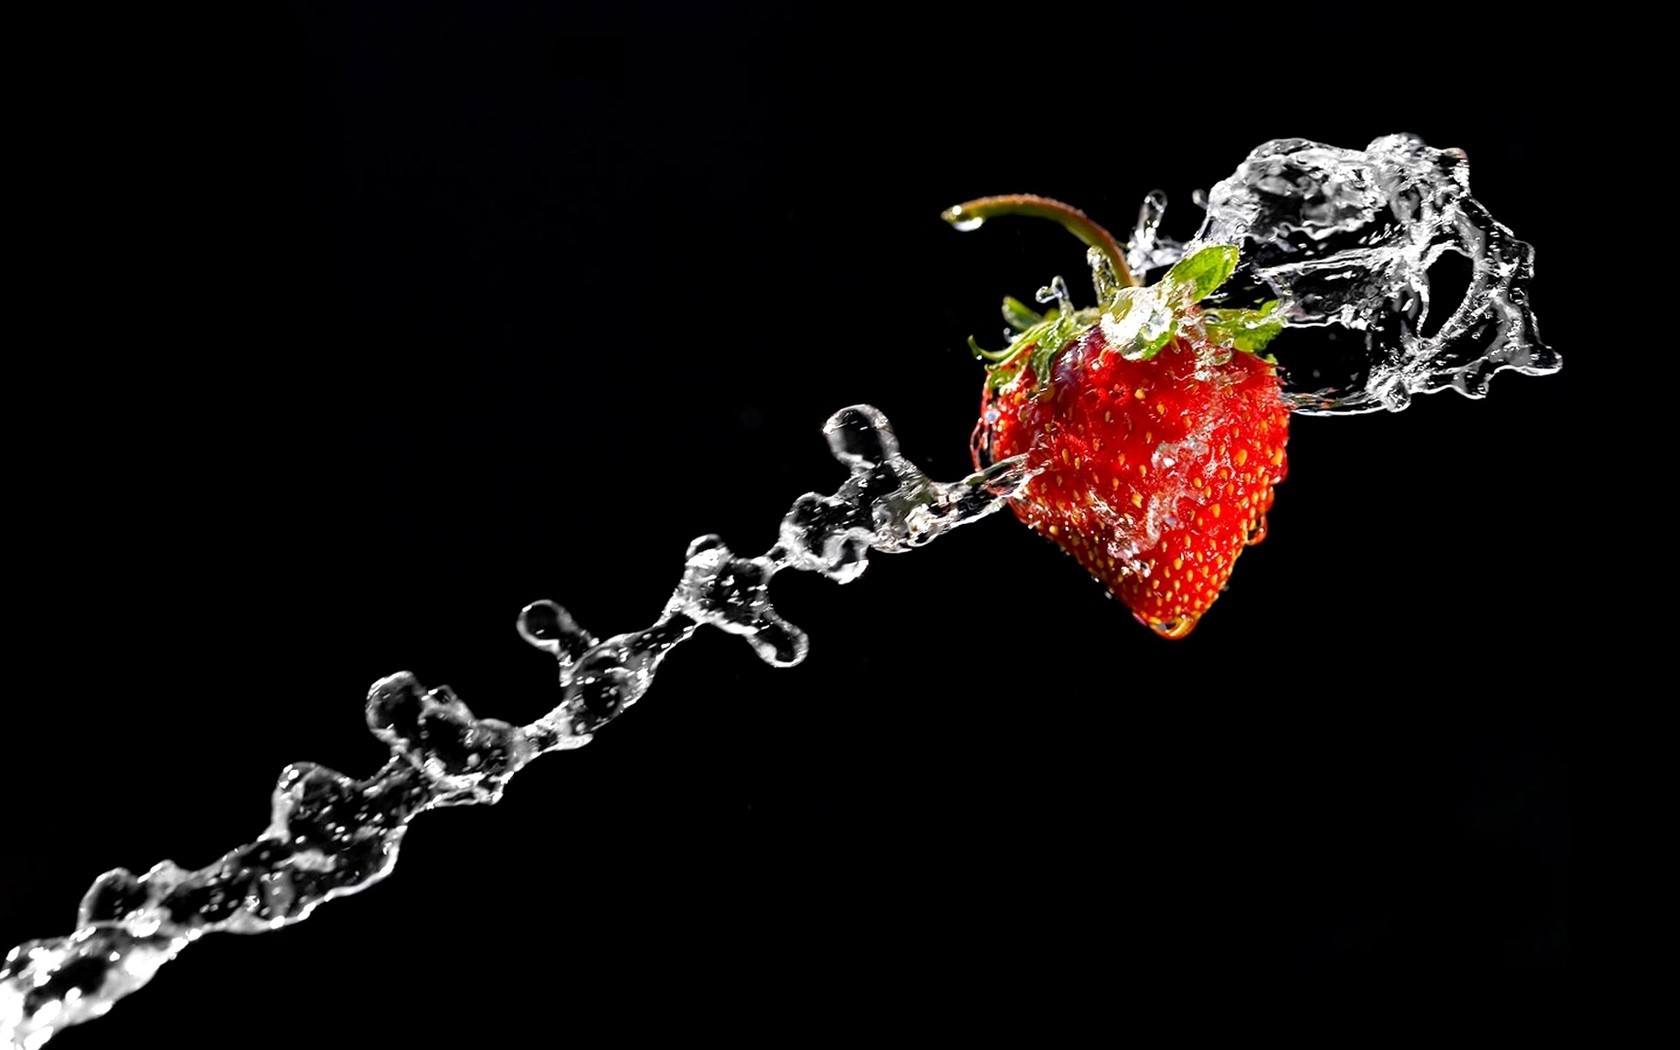 Strawberries On A Black Background Wallpaper And Image